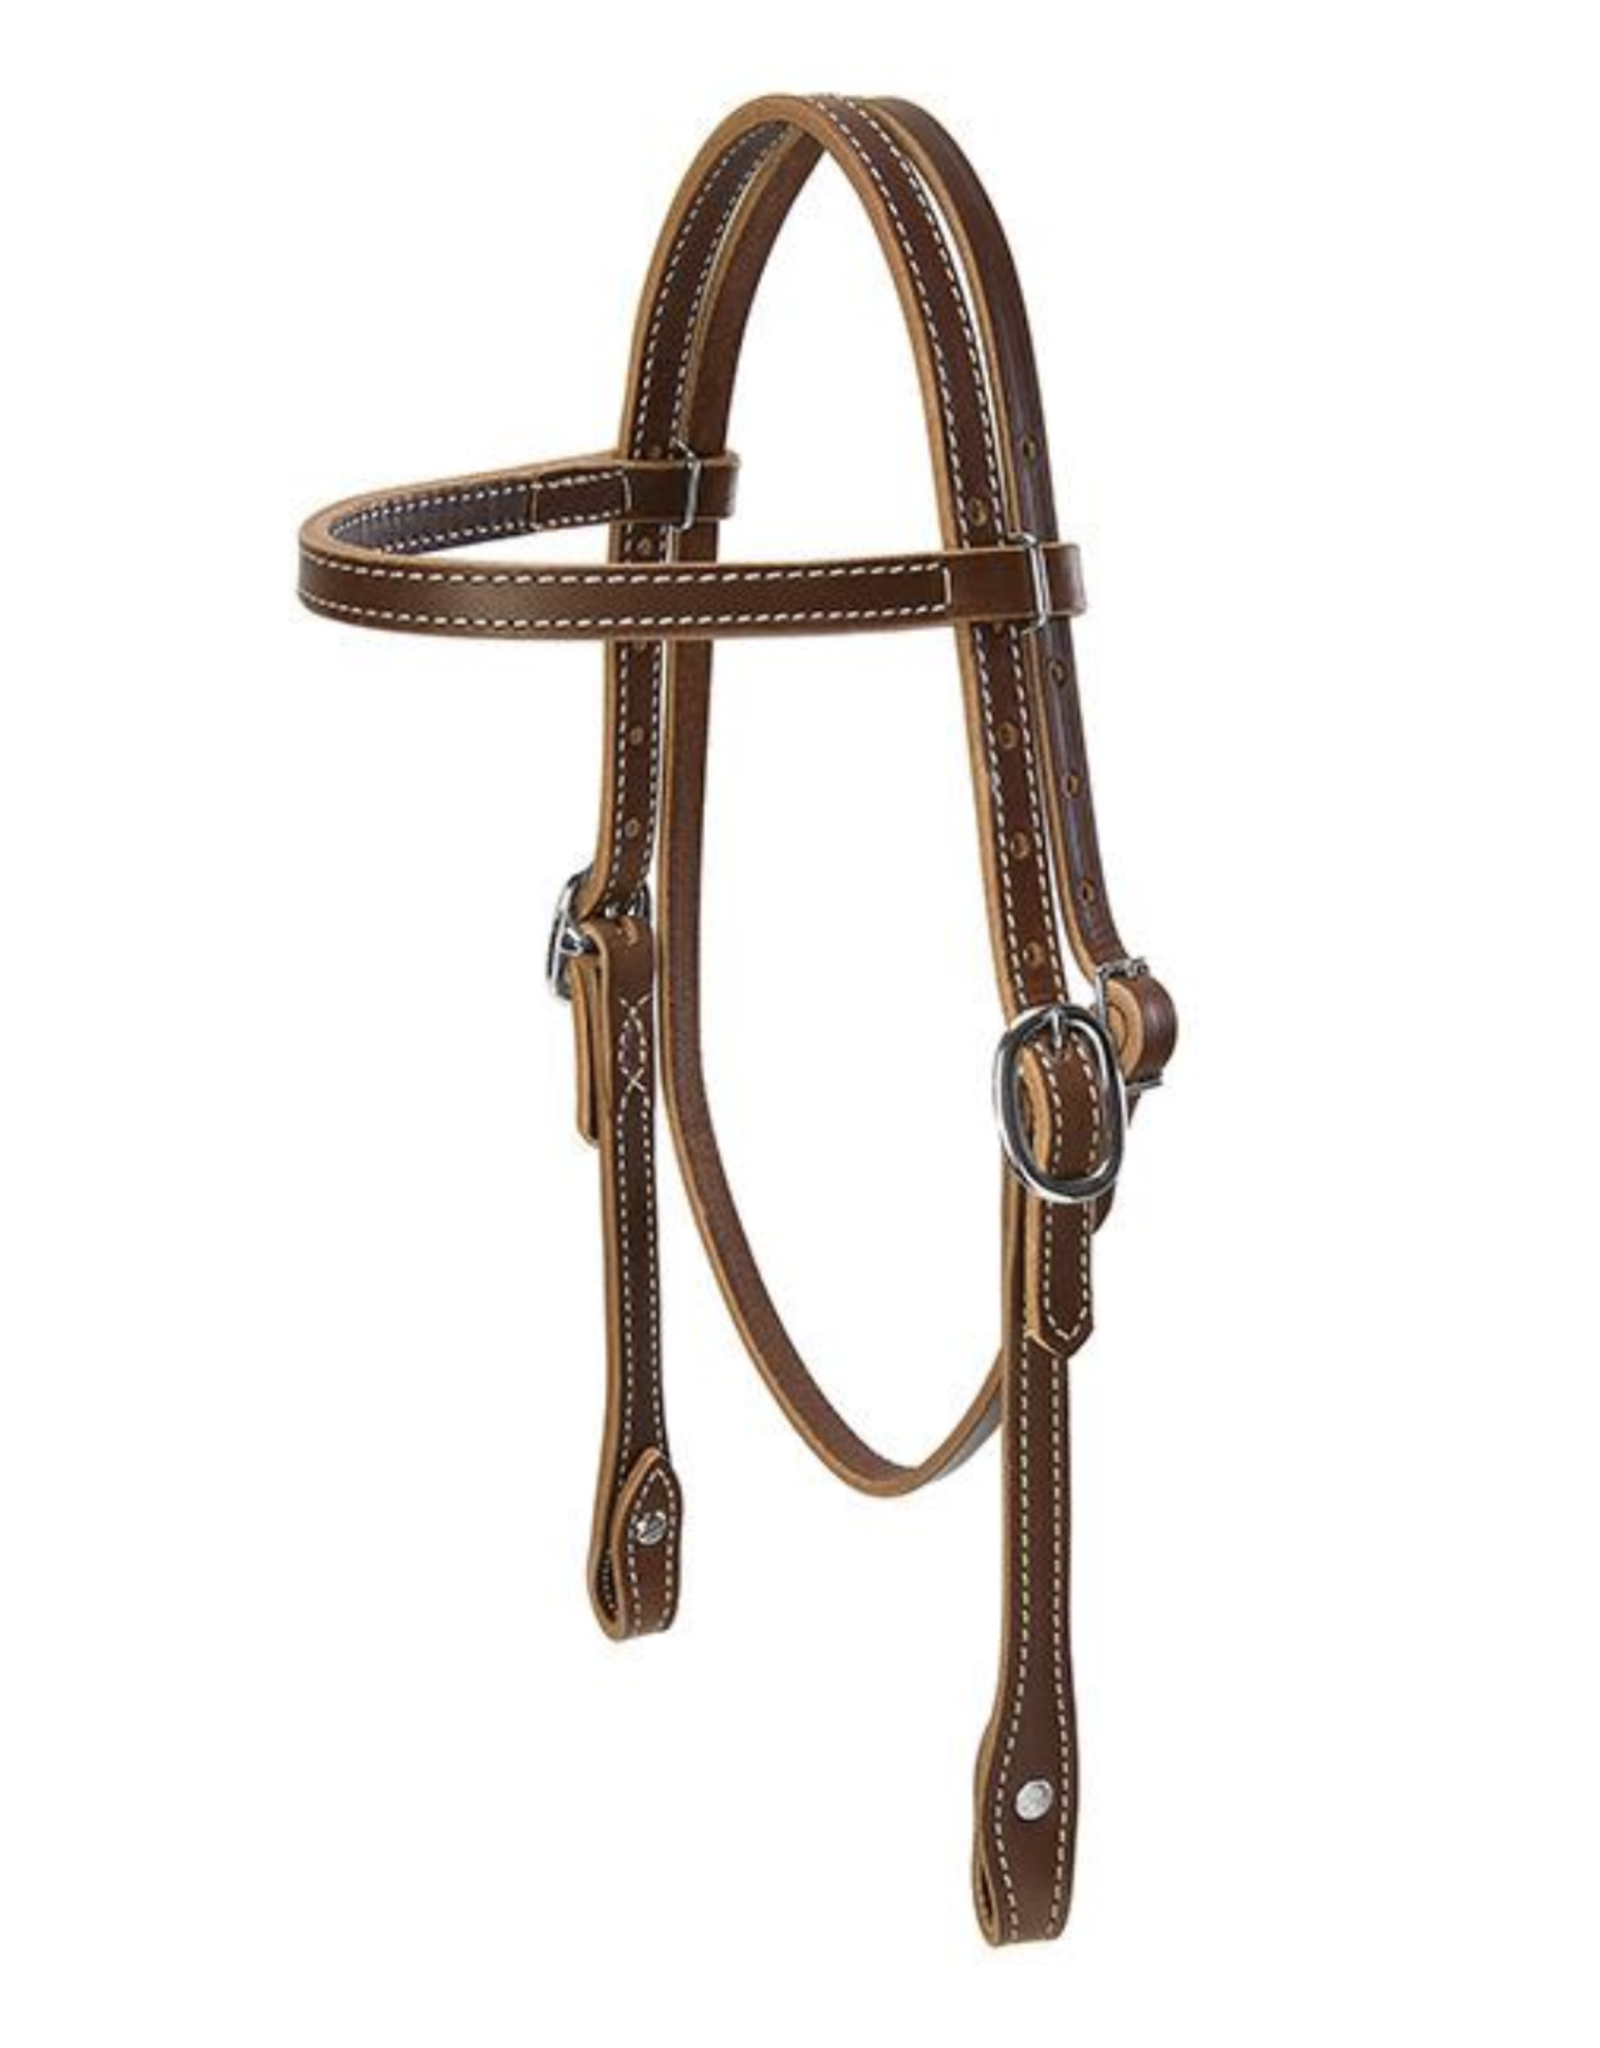 Weaver Doubled & Stitched Pony Headstall